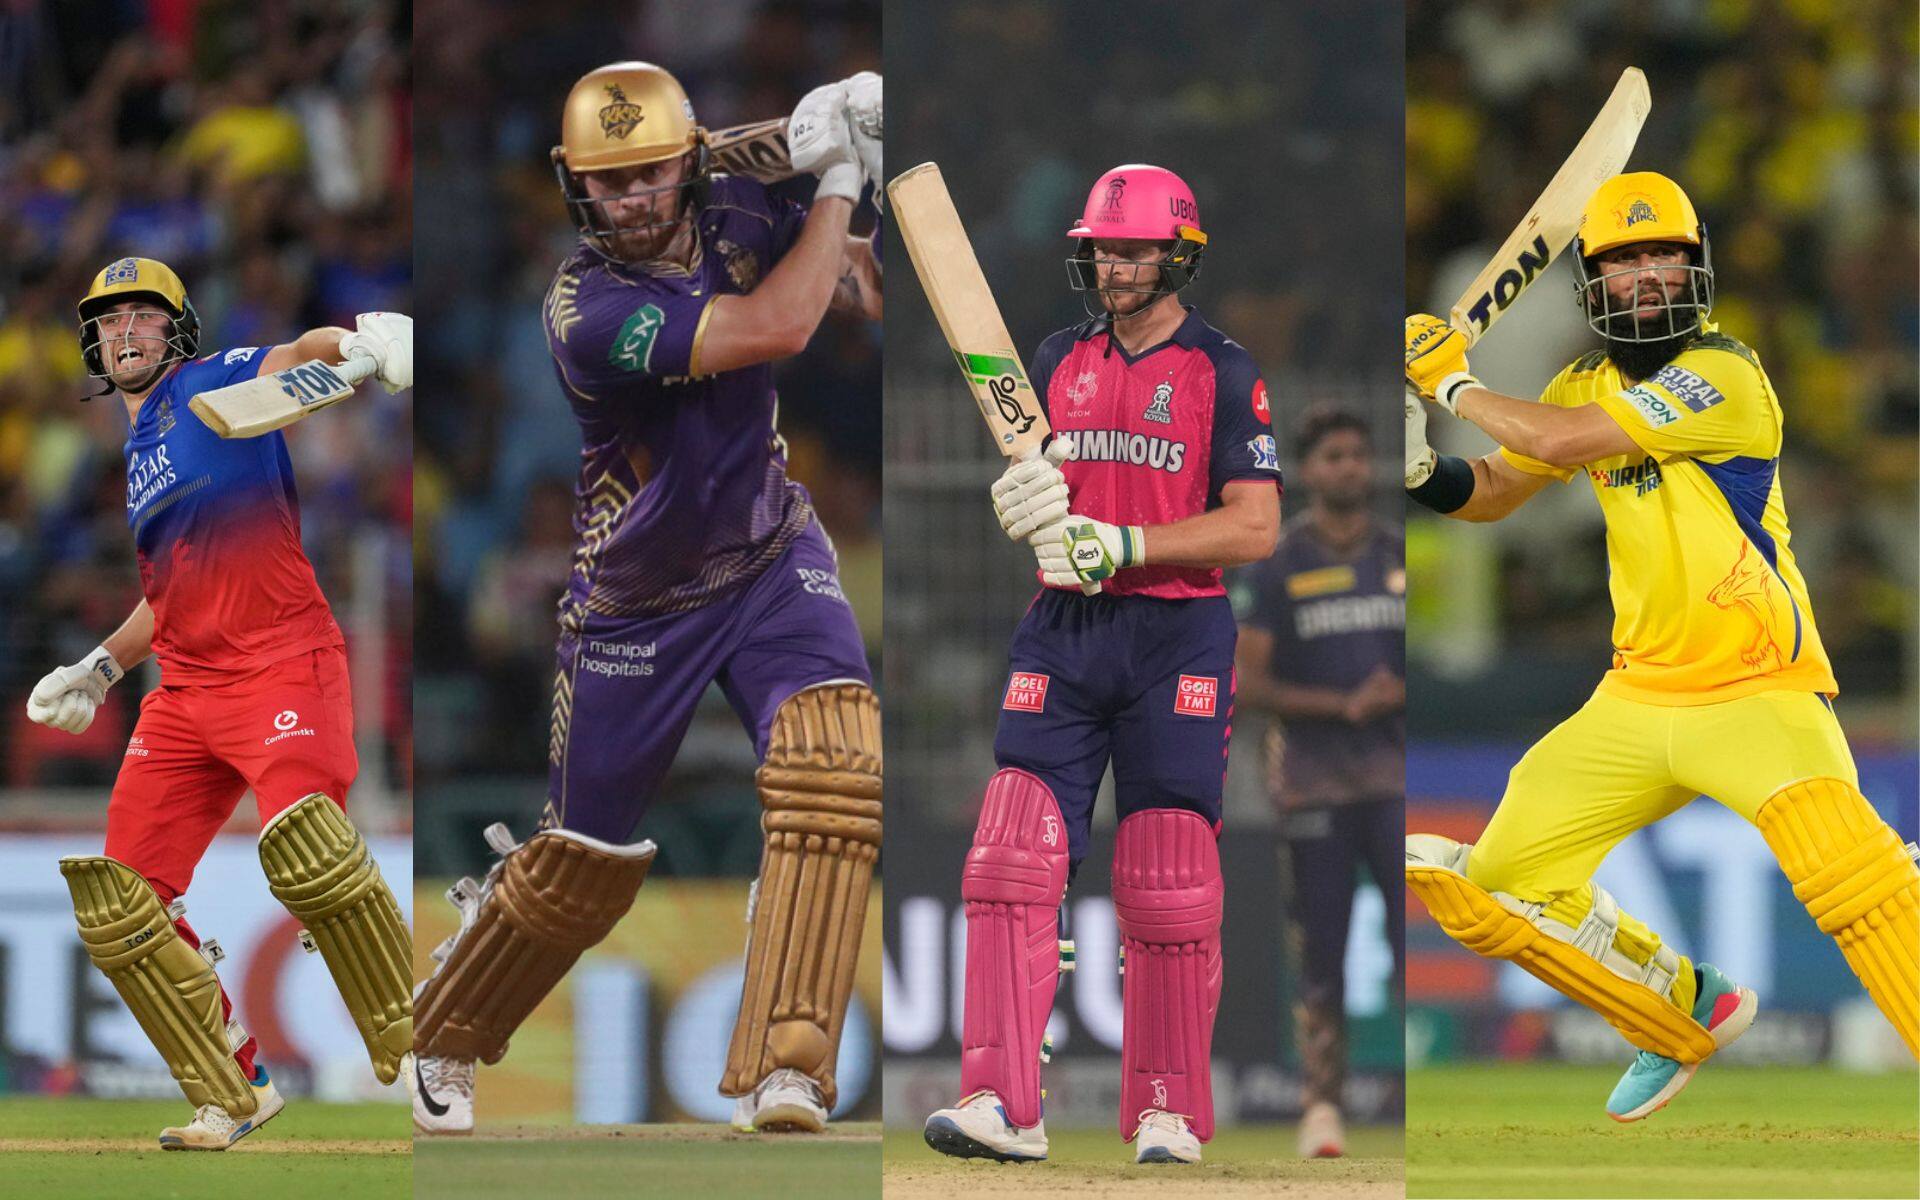 The English players will be leaving their IPL sides for national duties [AP Photos]